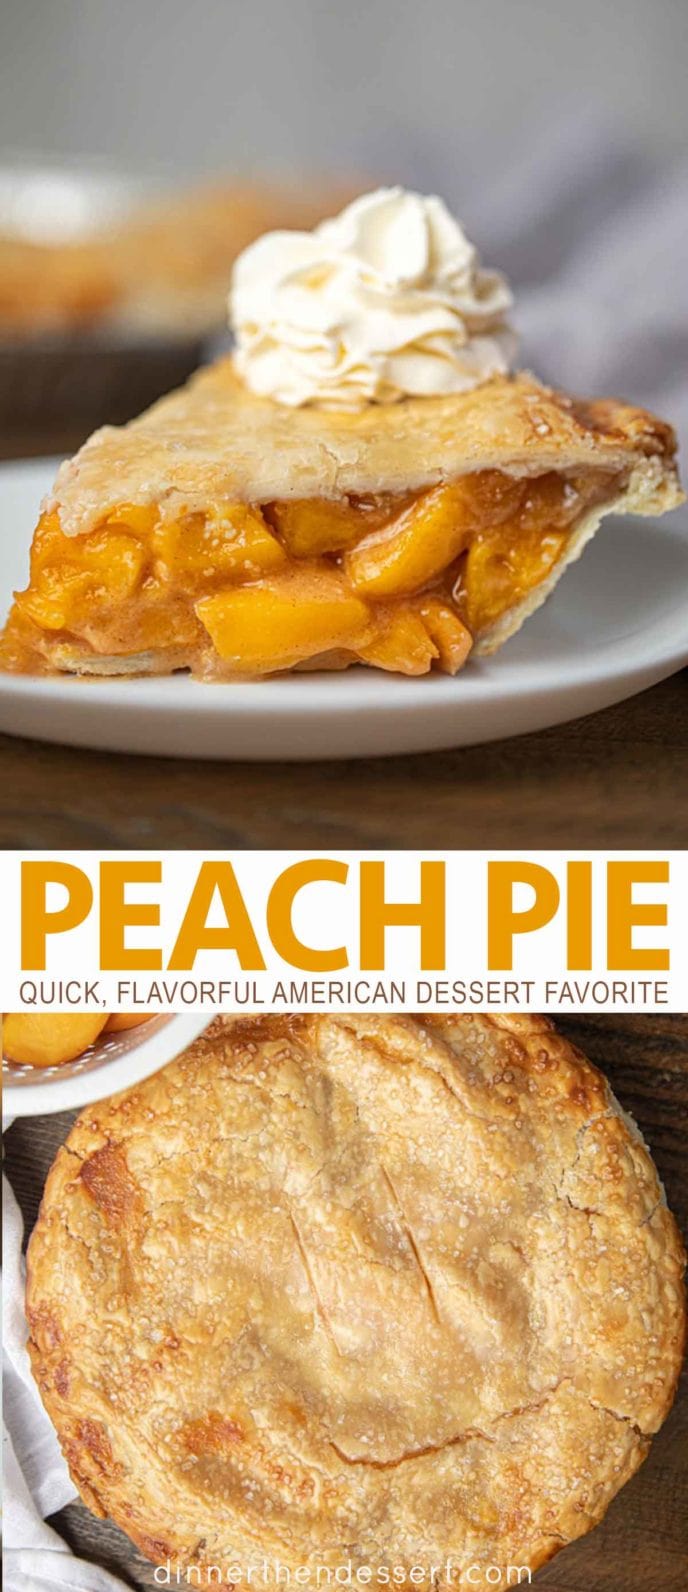 Peach pie with whipped cream